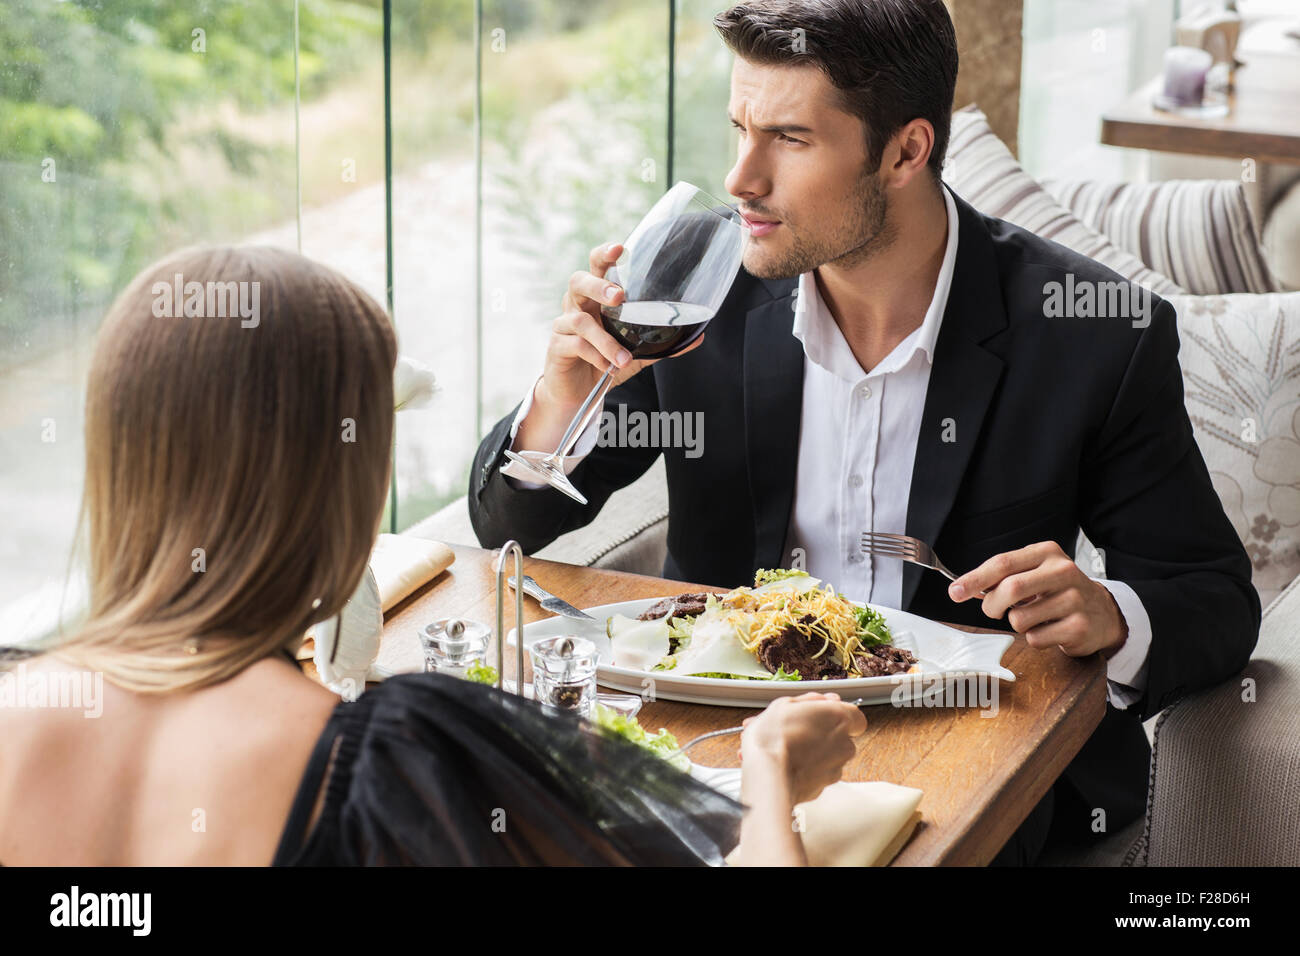 Portirat of a beautiful couple drinking wine in restaurant Stock Photo